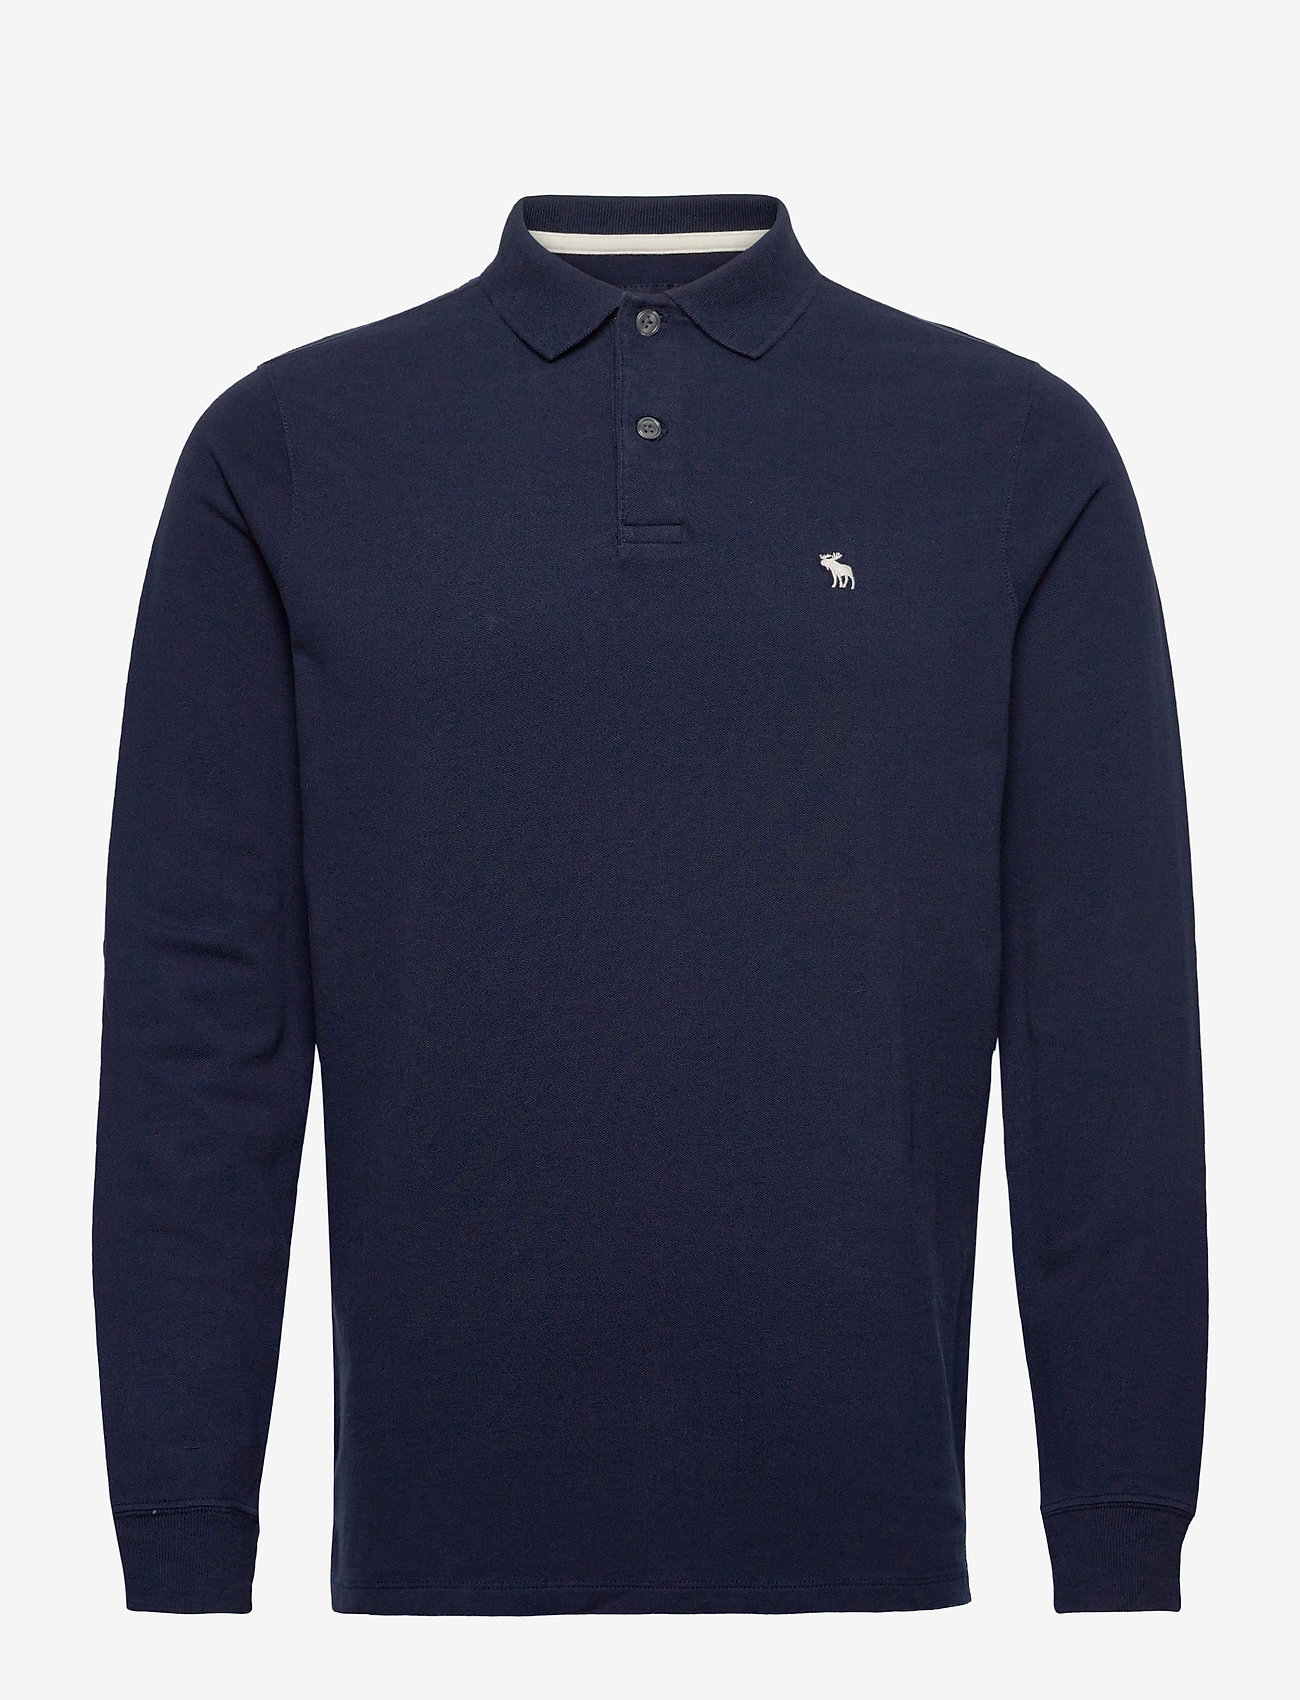 abercrombie & fitch polo